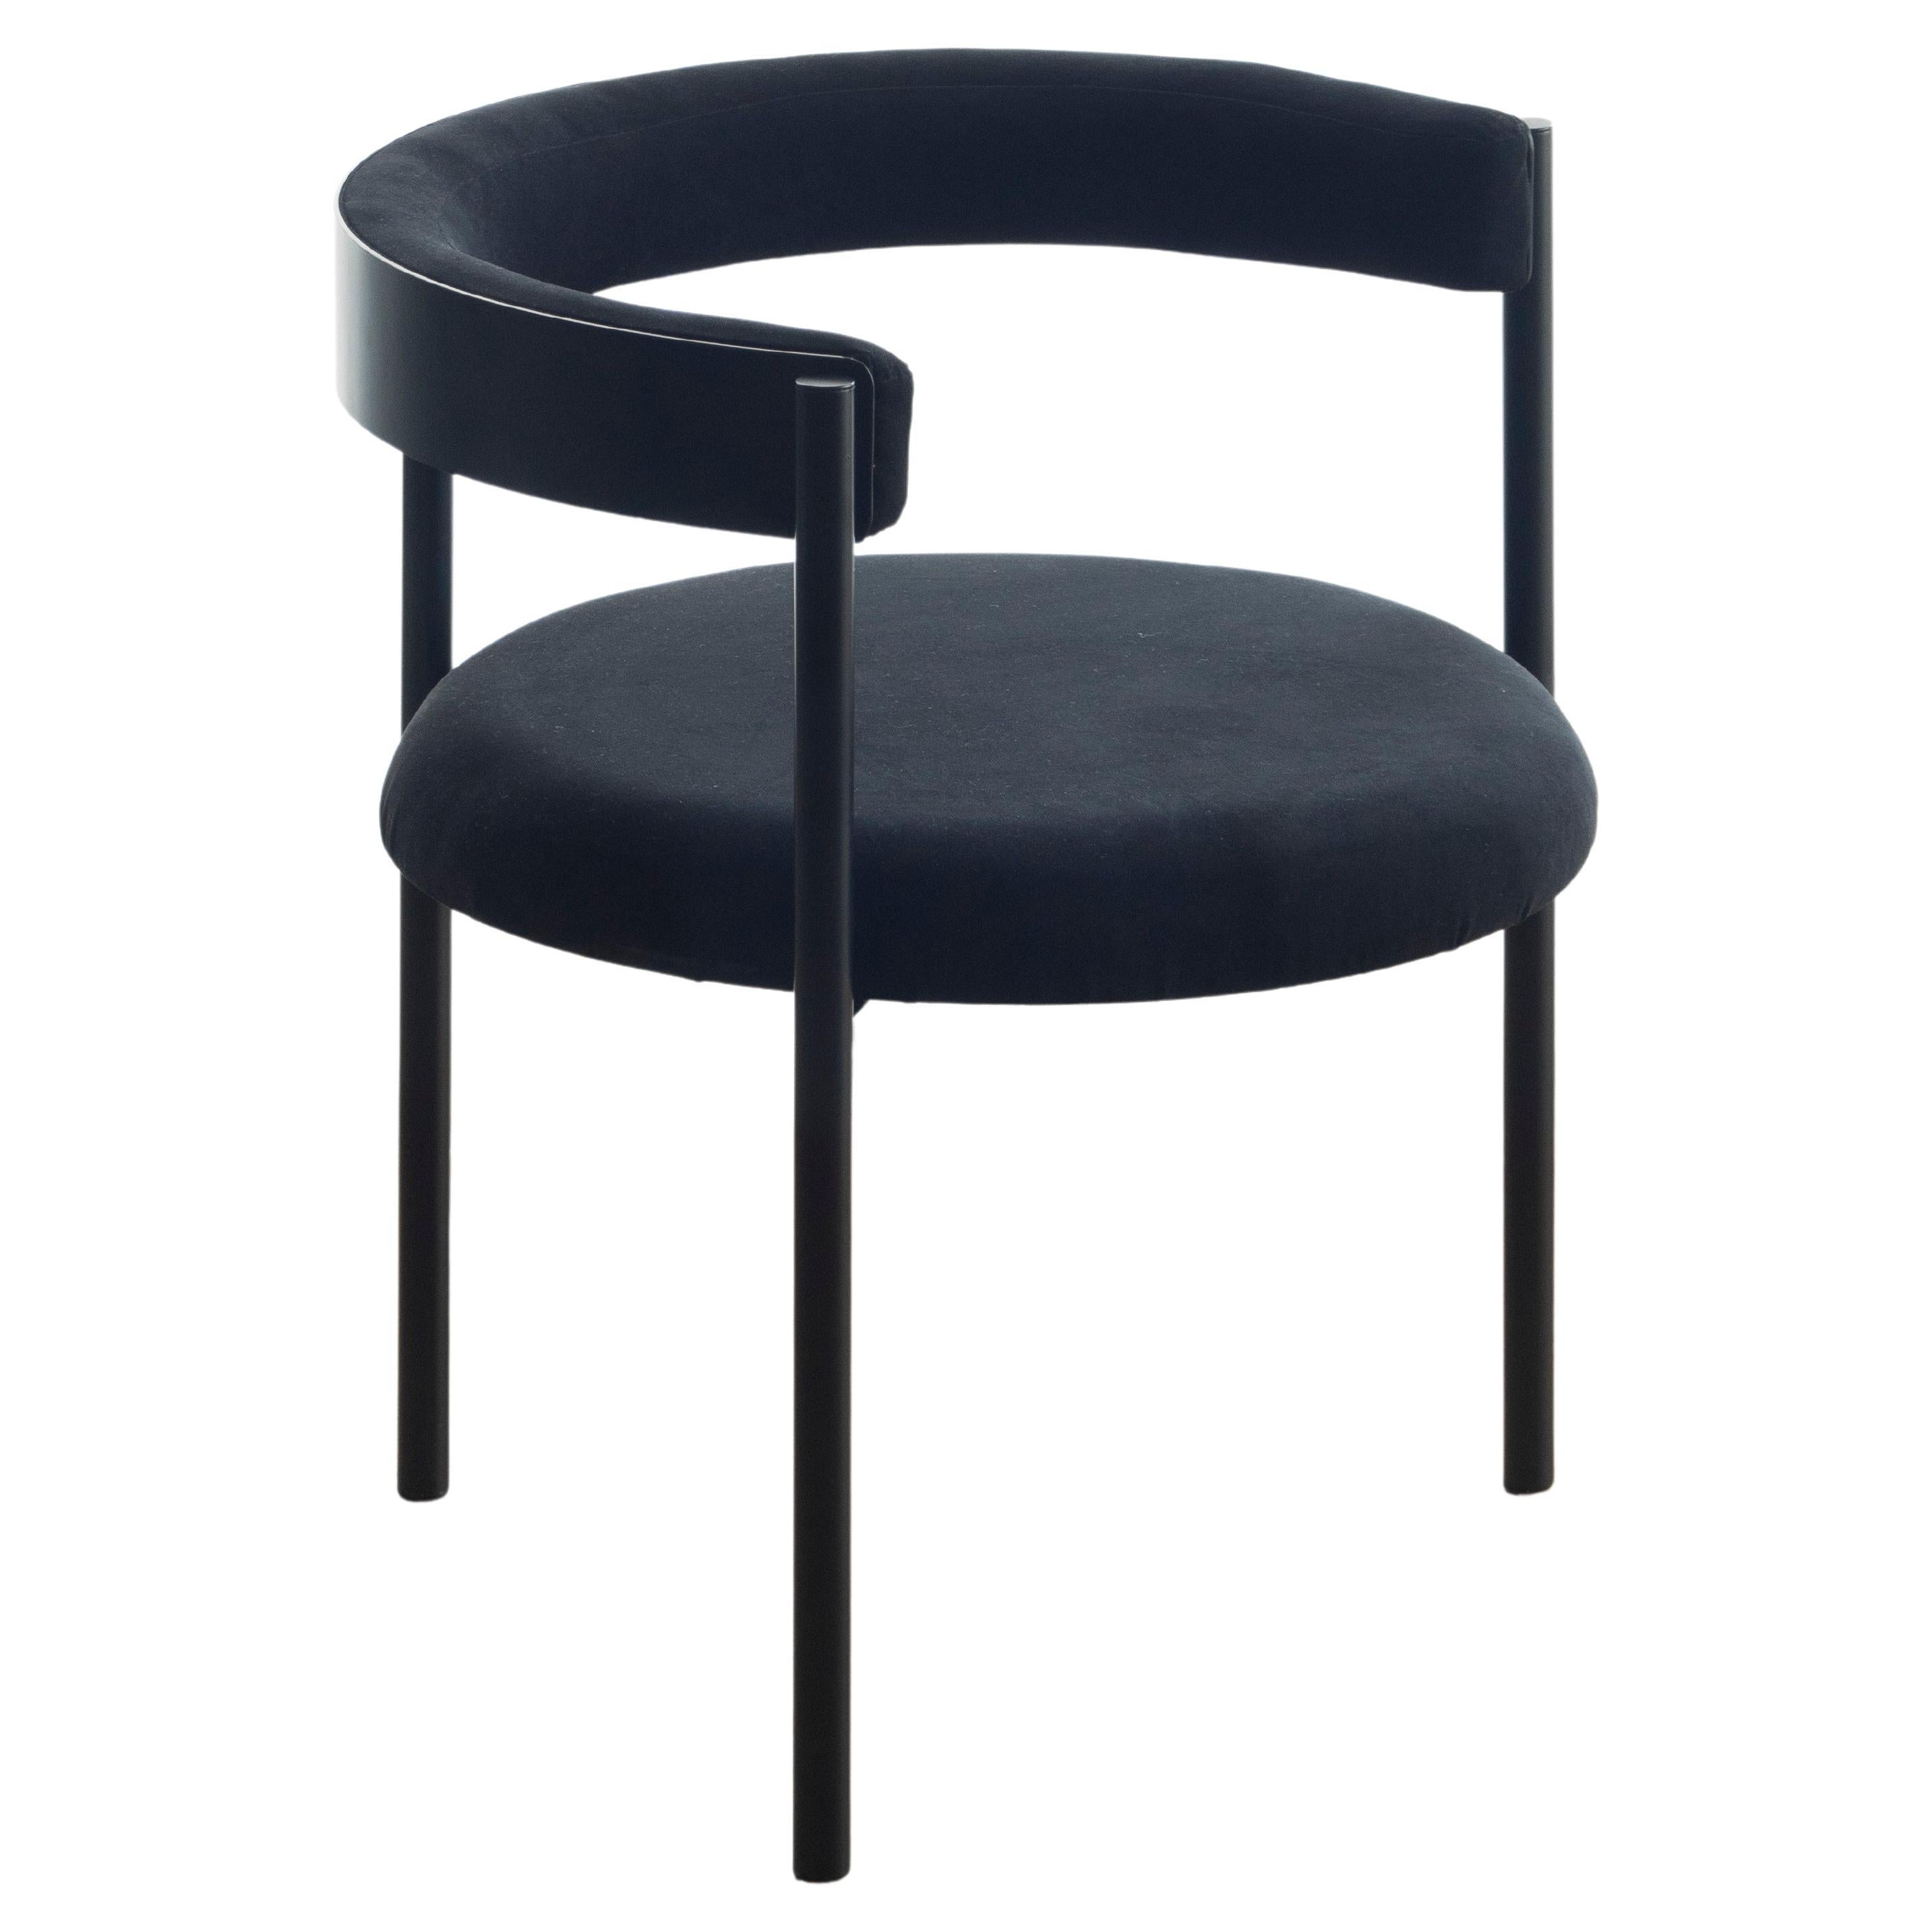 Set of 2 Aro chairs, black by Ries
Dimensions: W60 x D60 x H67,5 cm
Materials: Round steel tube, high-density foam, and velvet upholstery

Also available: merlot, dark blue, mika, oceano, pink and yellow,

Ries is a design studio based in